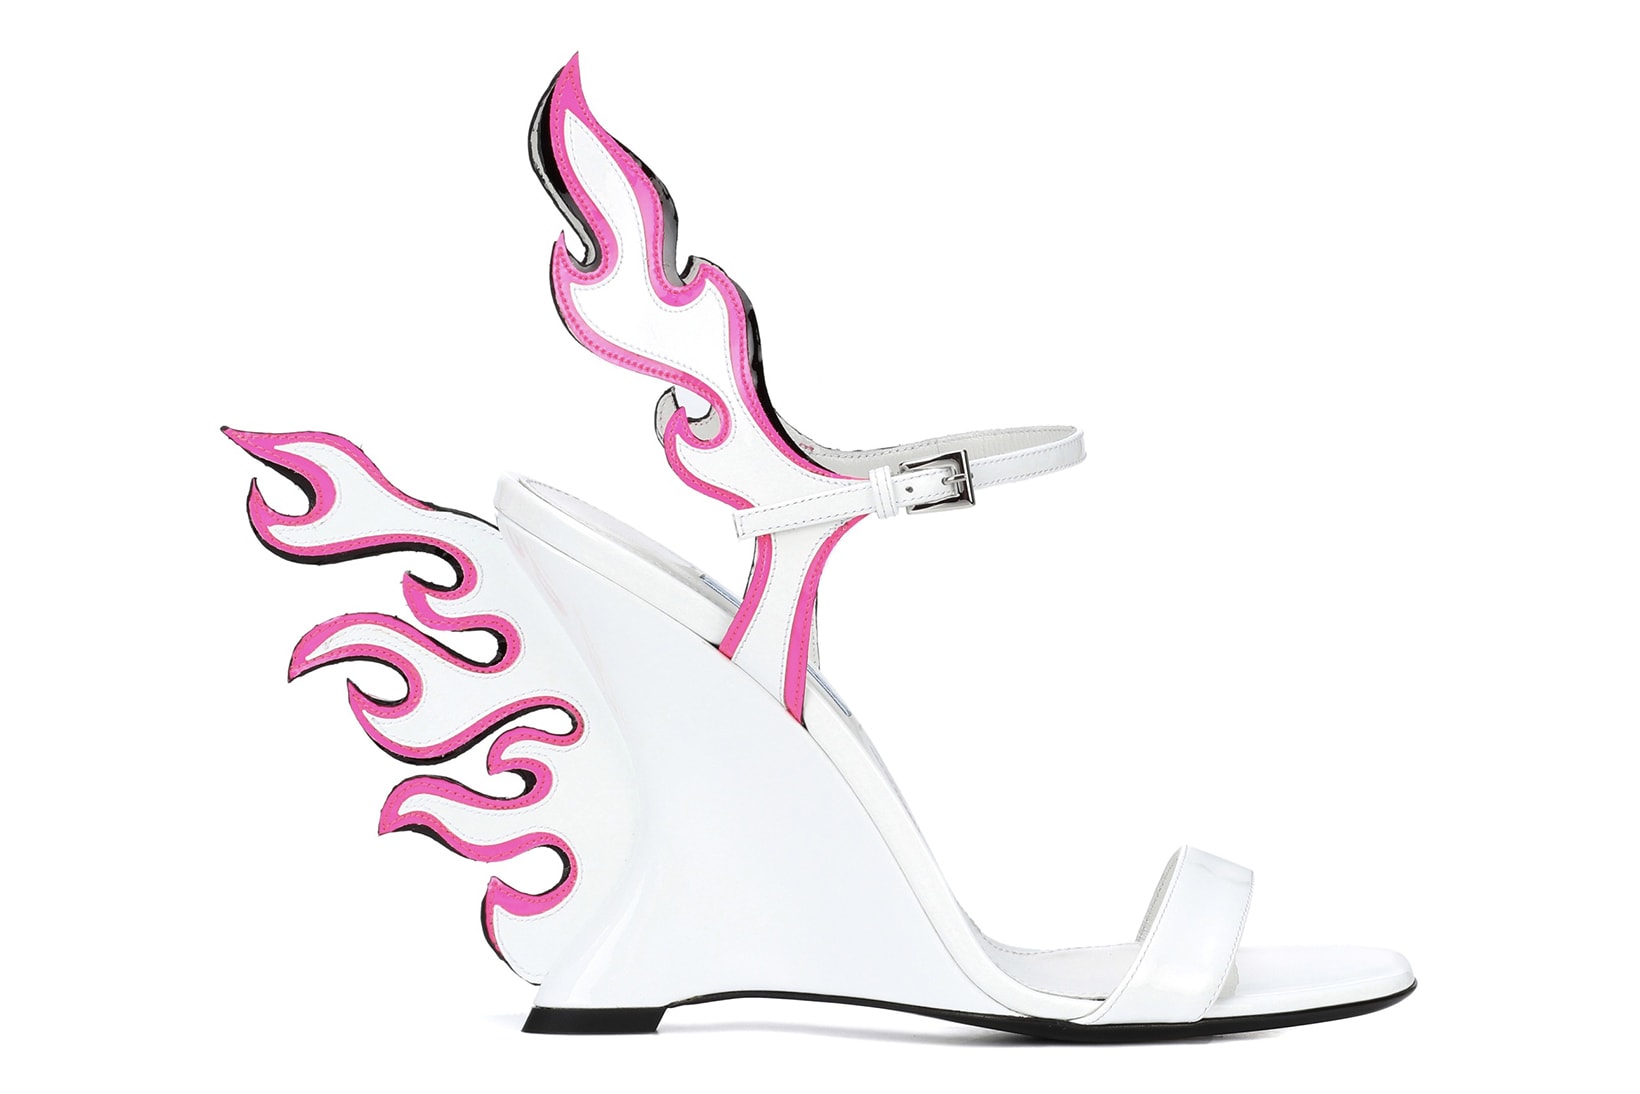 Prada drops White and Neon Pink Flame Sandals